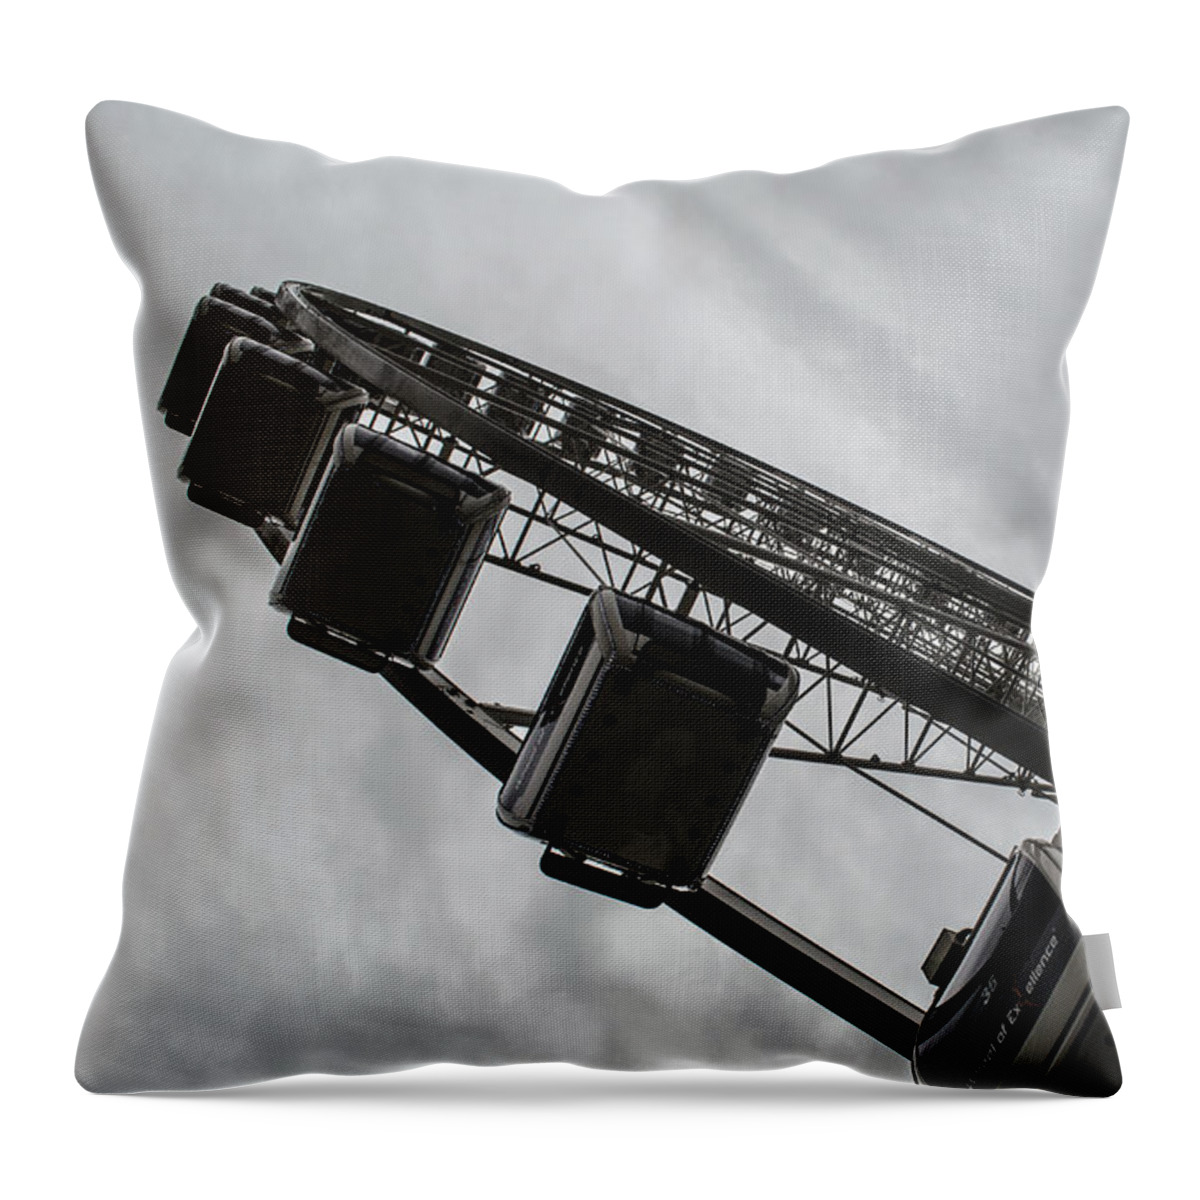 Ferris Wheel Throw Pillow featuring the photograph Sitting Underneath The Ferris Wheel by Donna Brown